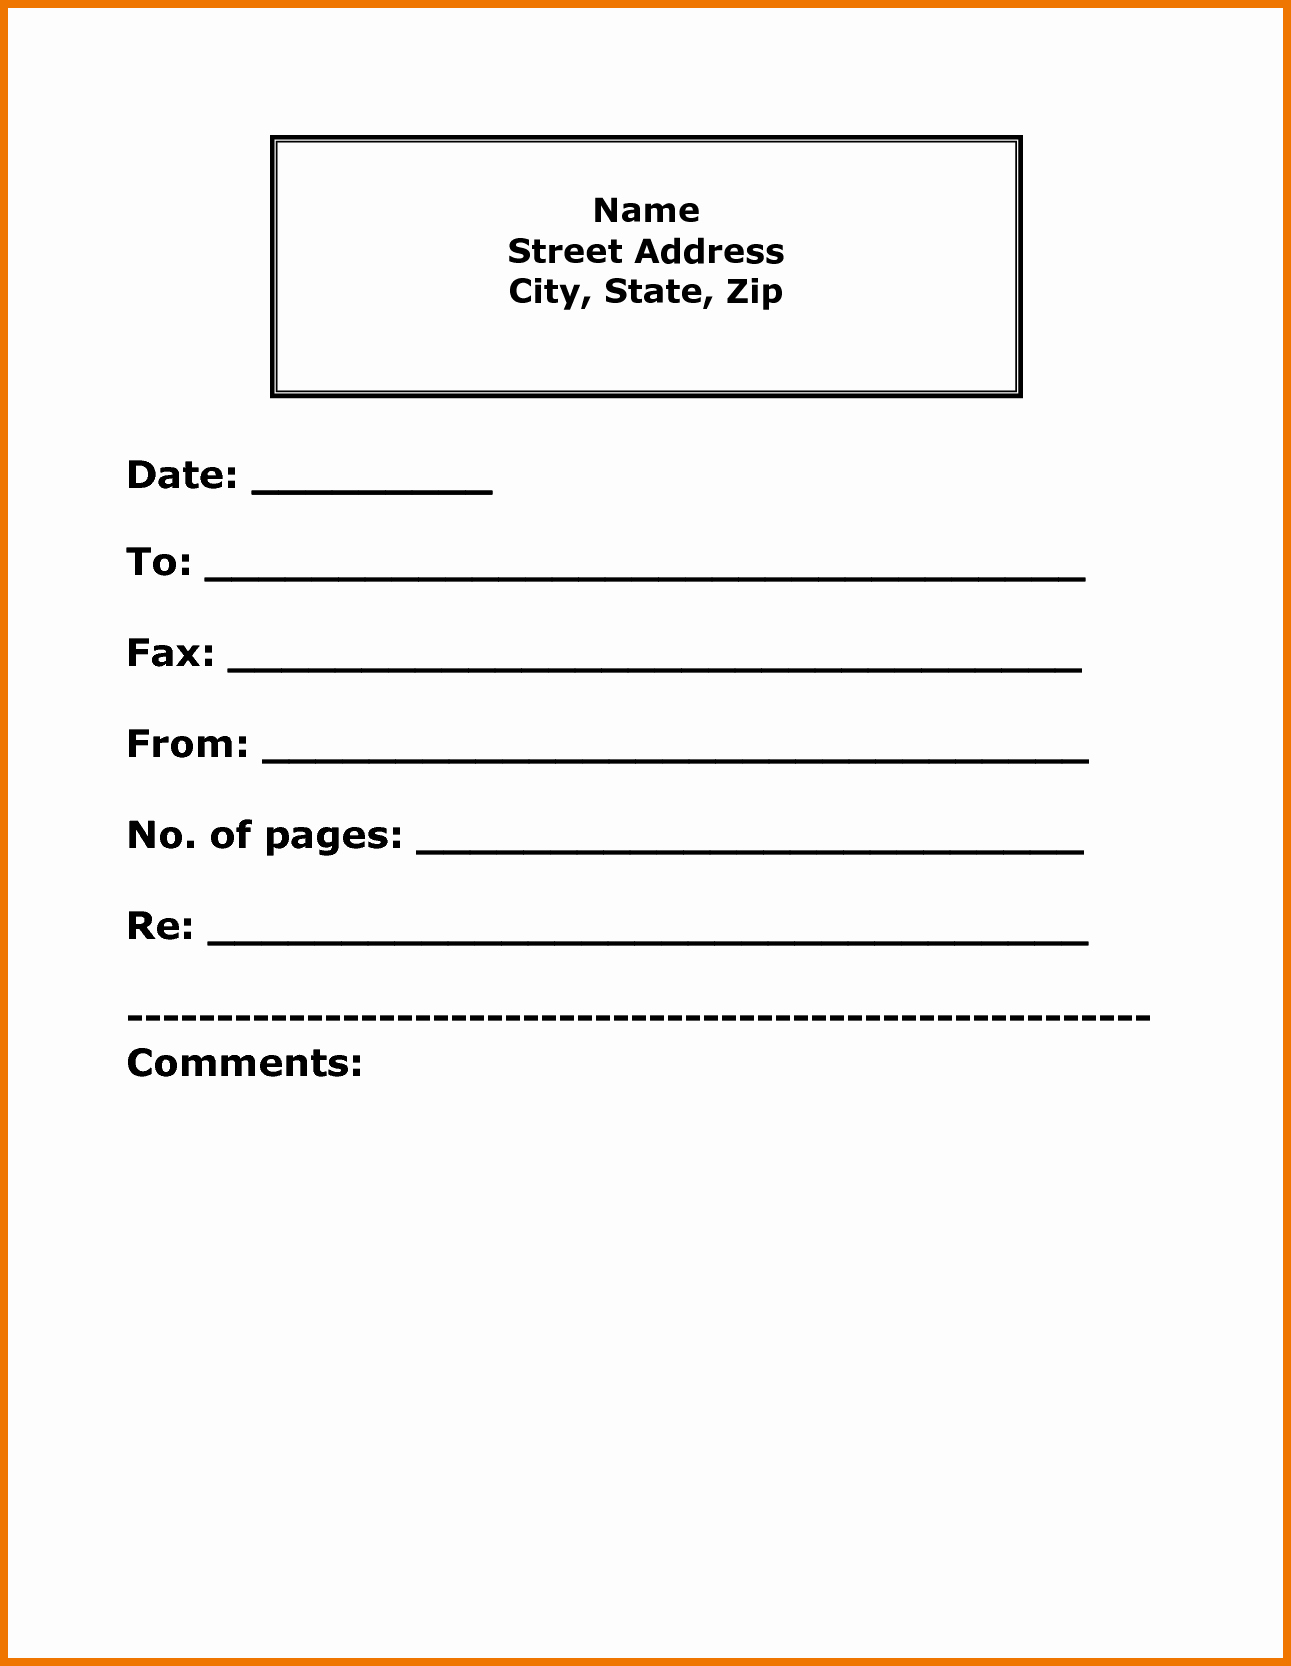 How to Fax Cover Sheet Awesome Working Papers